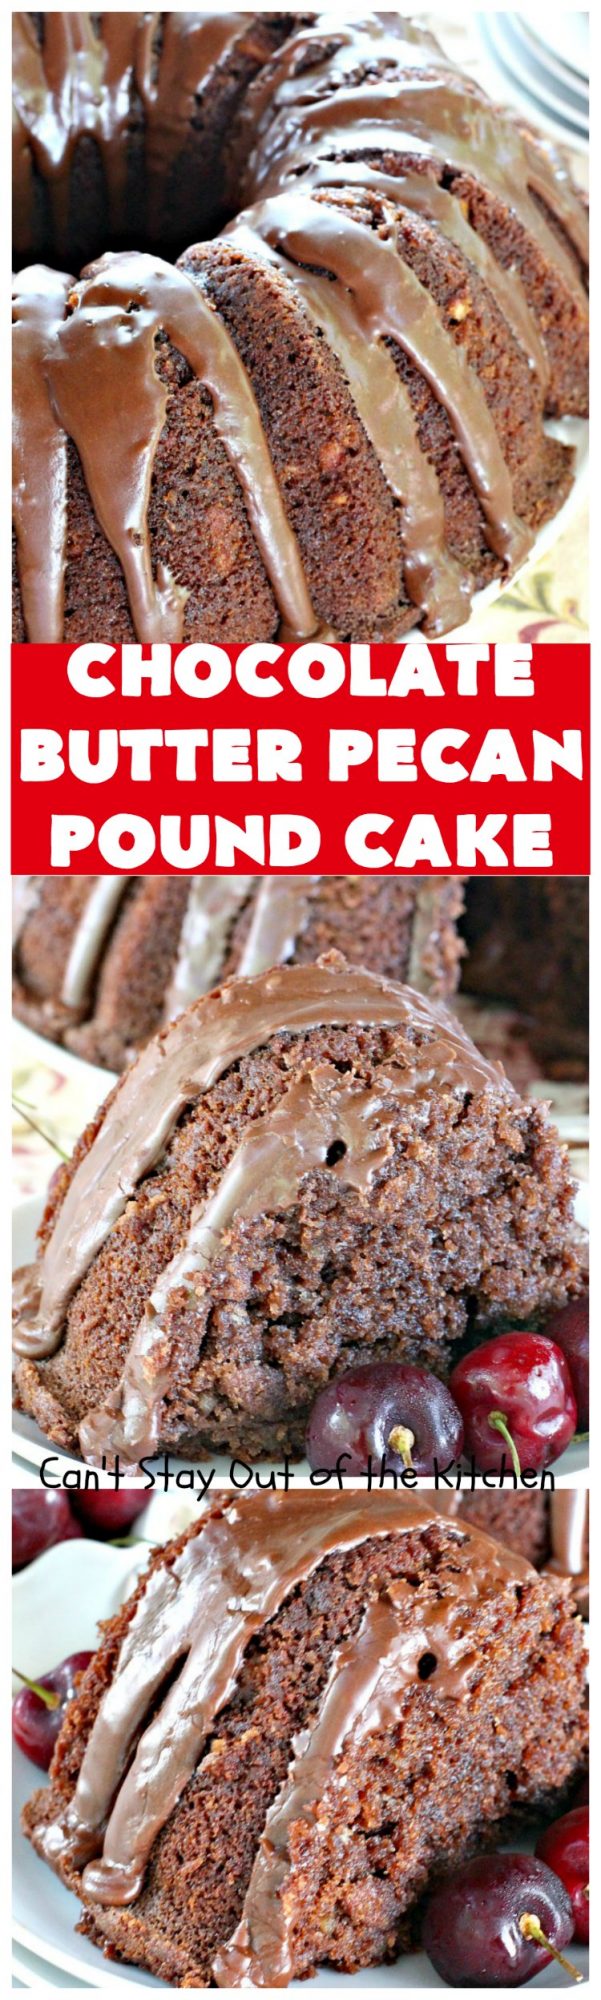 Chocolate Butter Pecan Pound Cake – Can't Stay Out of the Kitchen